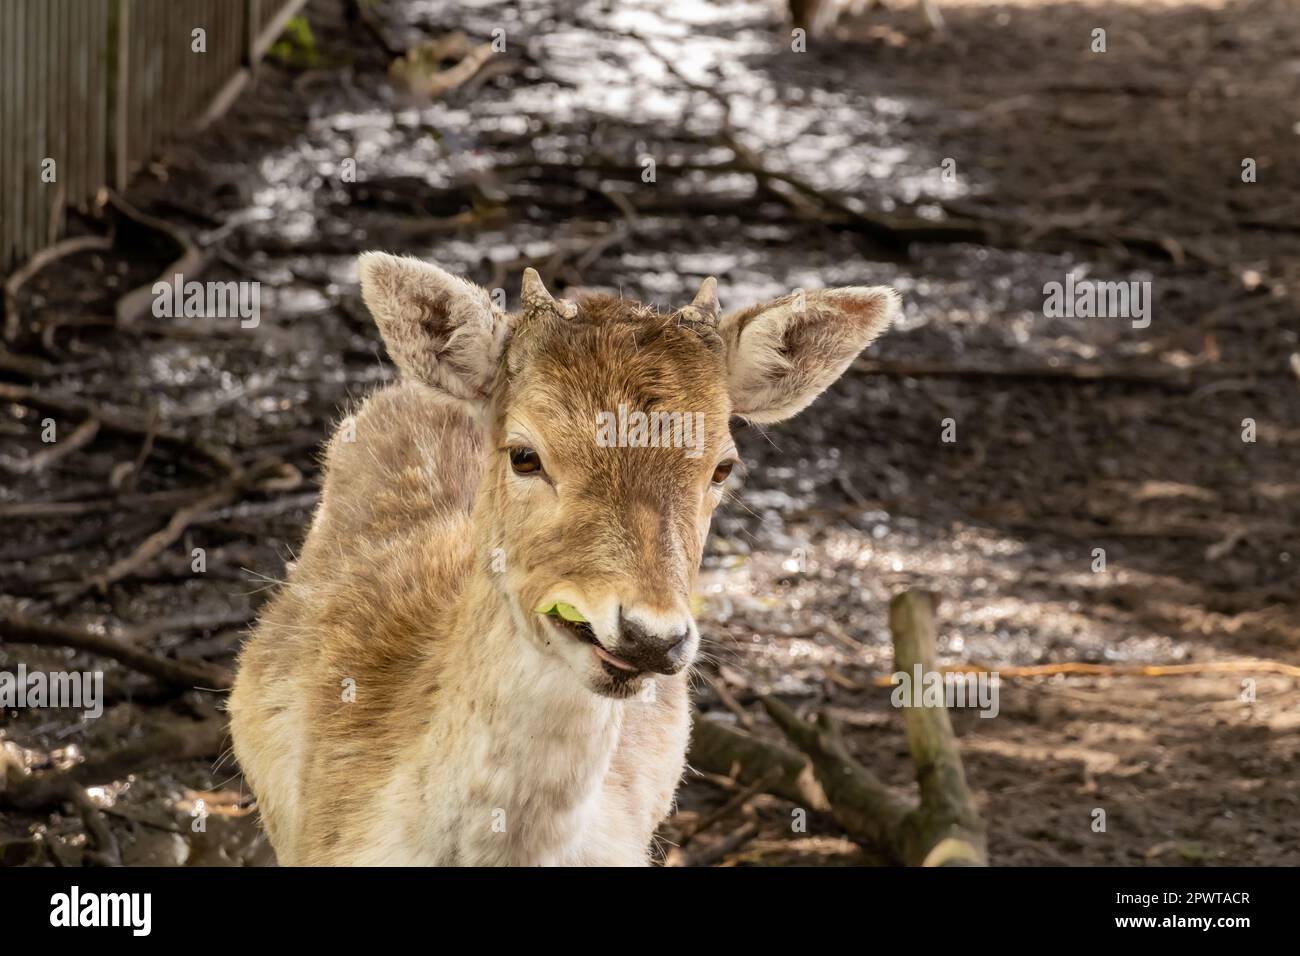 Fallow deer, Dama dama, fawn, young male with antler buttons eating in deer park, Hilversum, Netherlands Stock Photo